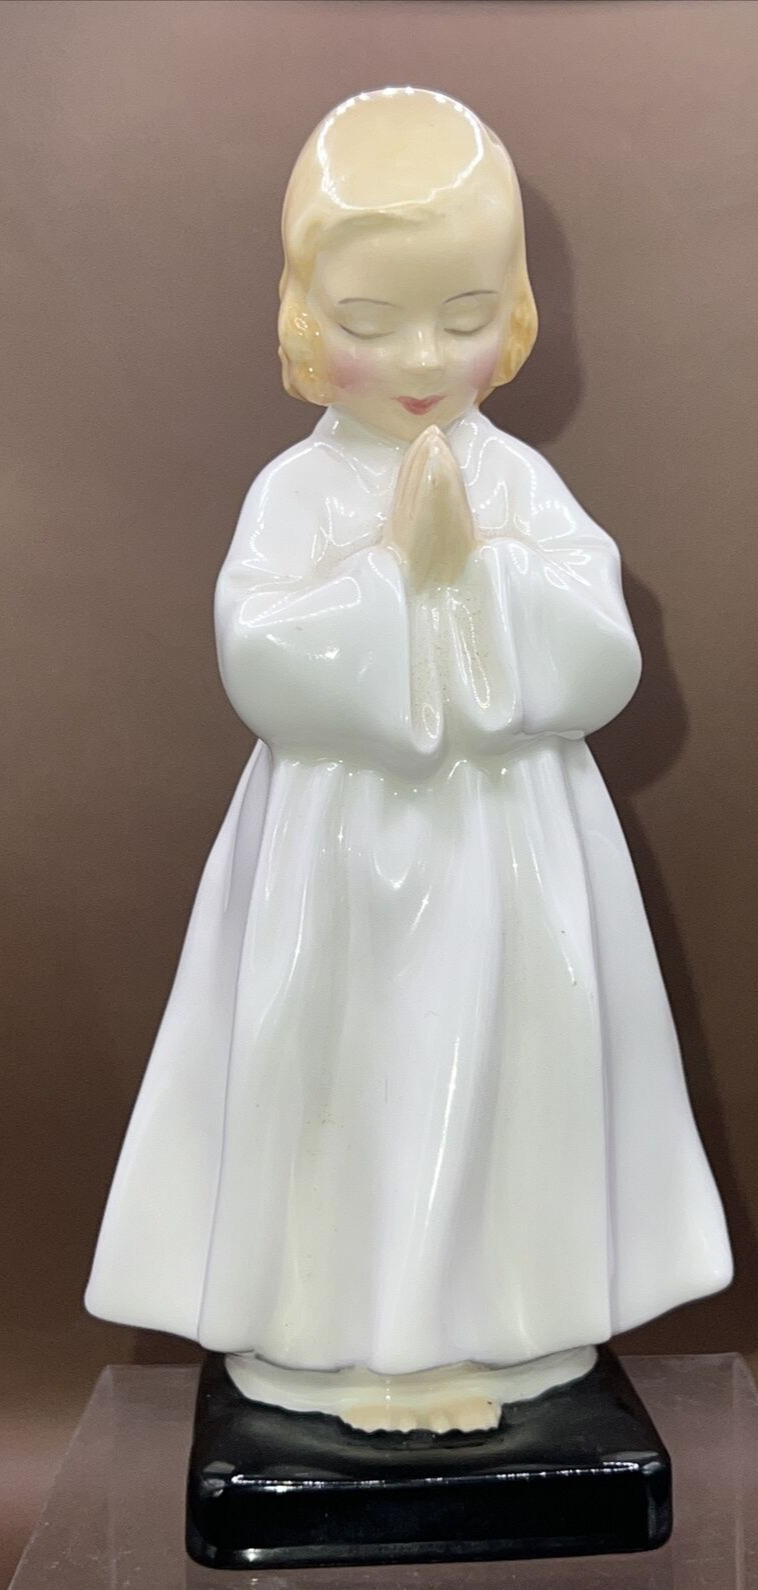 Bedtime No842481 Royal Doulton Figurine Corp1945 HN1978 from UK Vintage 1945